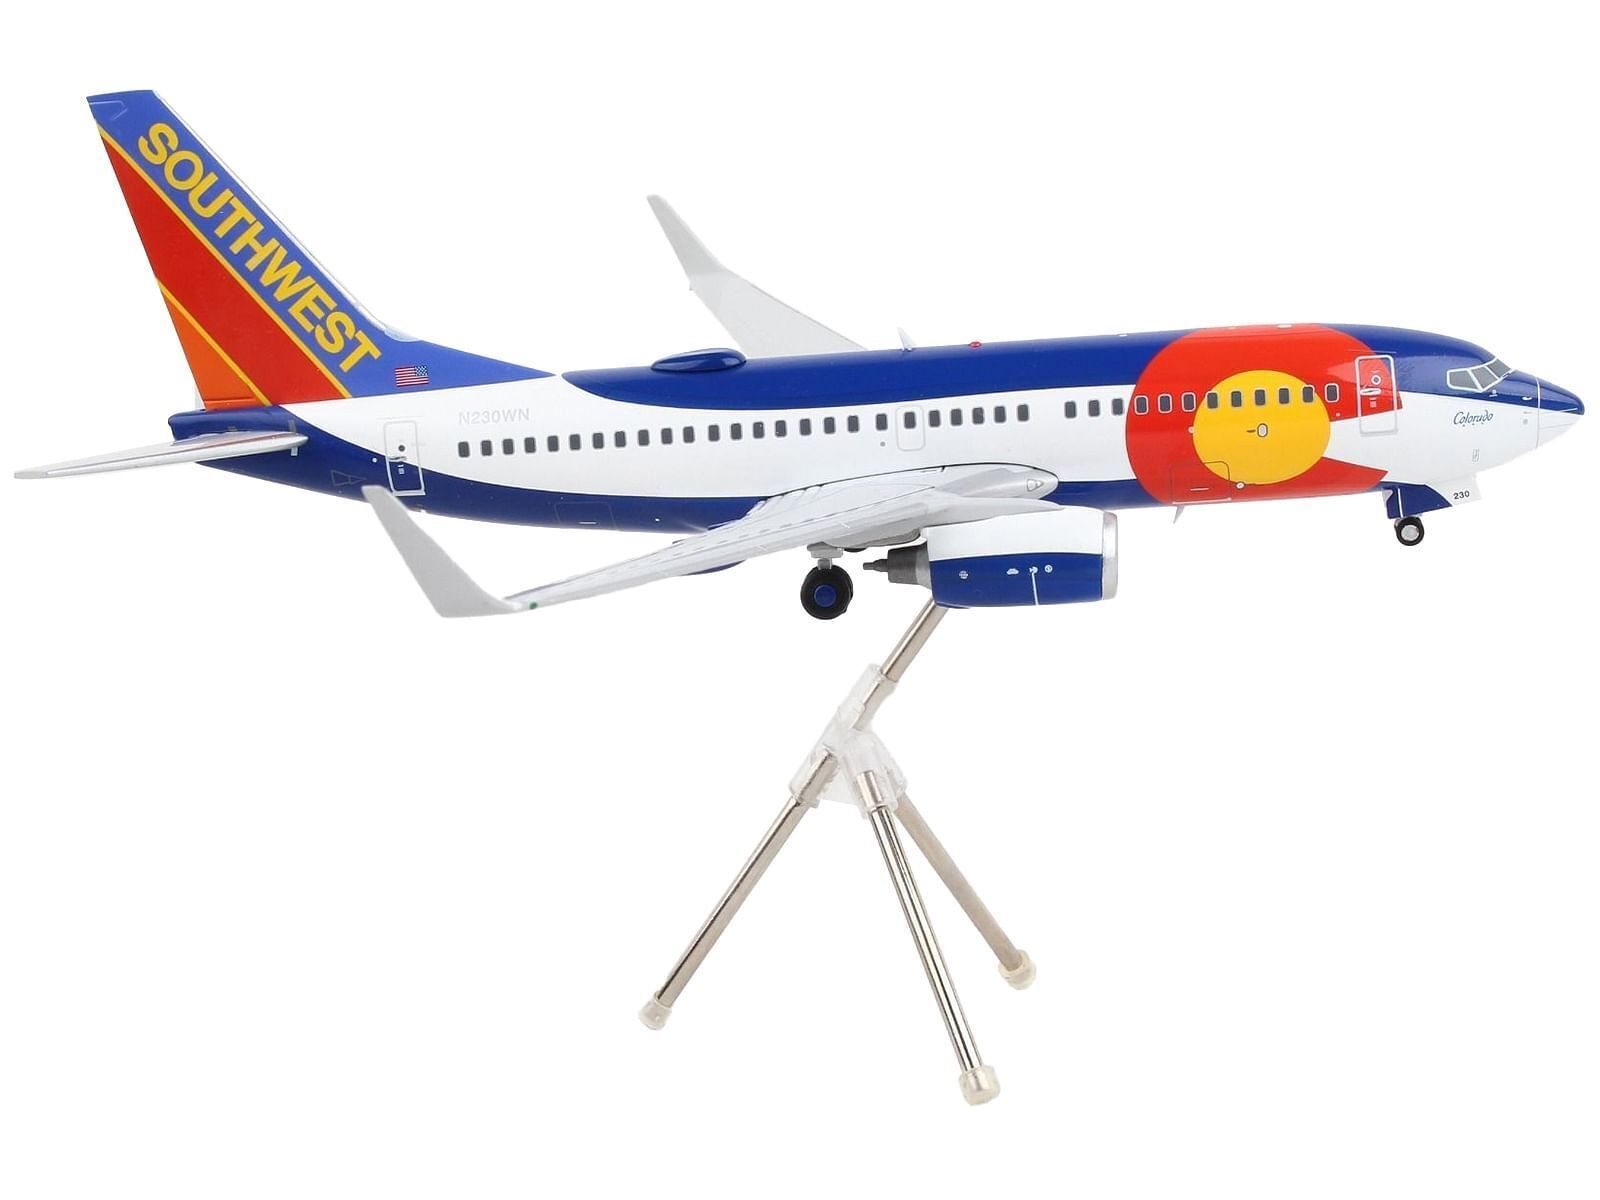 Primary image for Boeing 737-700 Commercial Aircraft "Southwest Airlines - Colorado One" White an